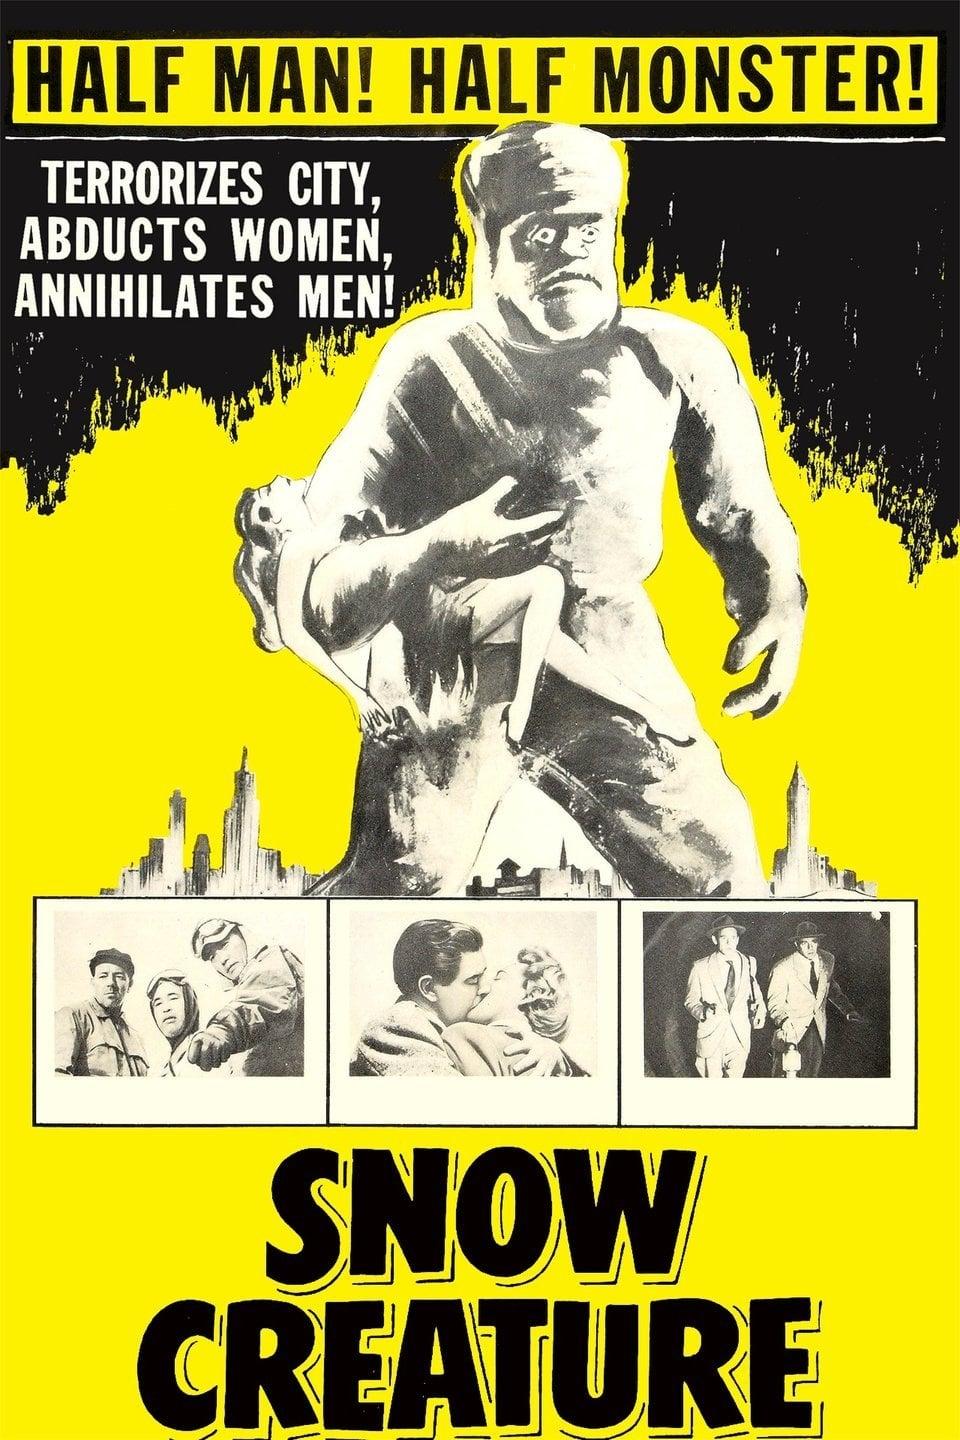 The Snow Creature poster